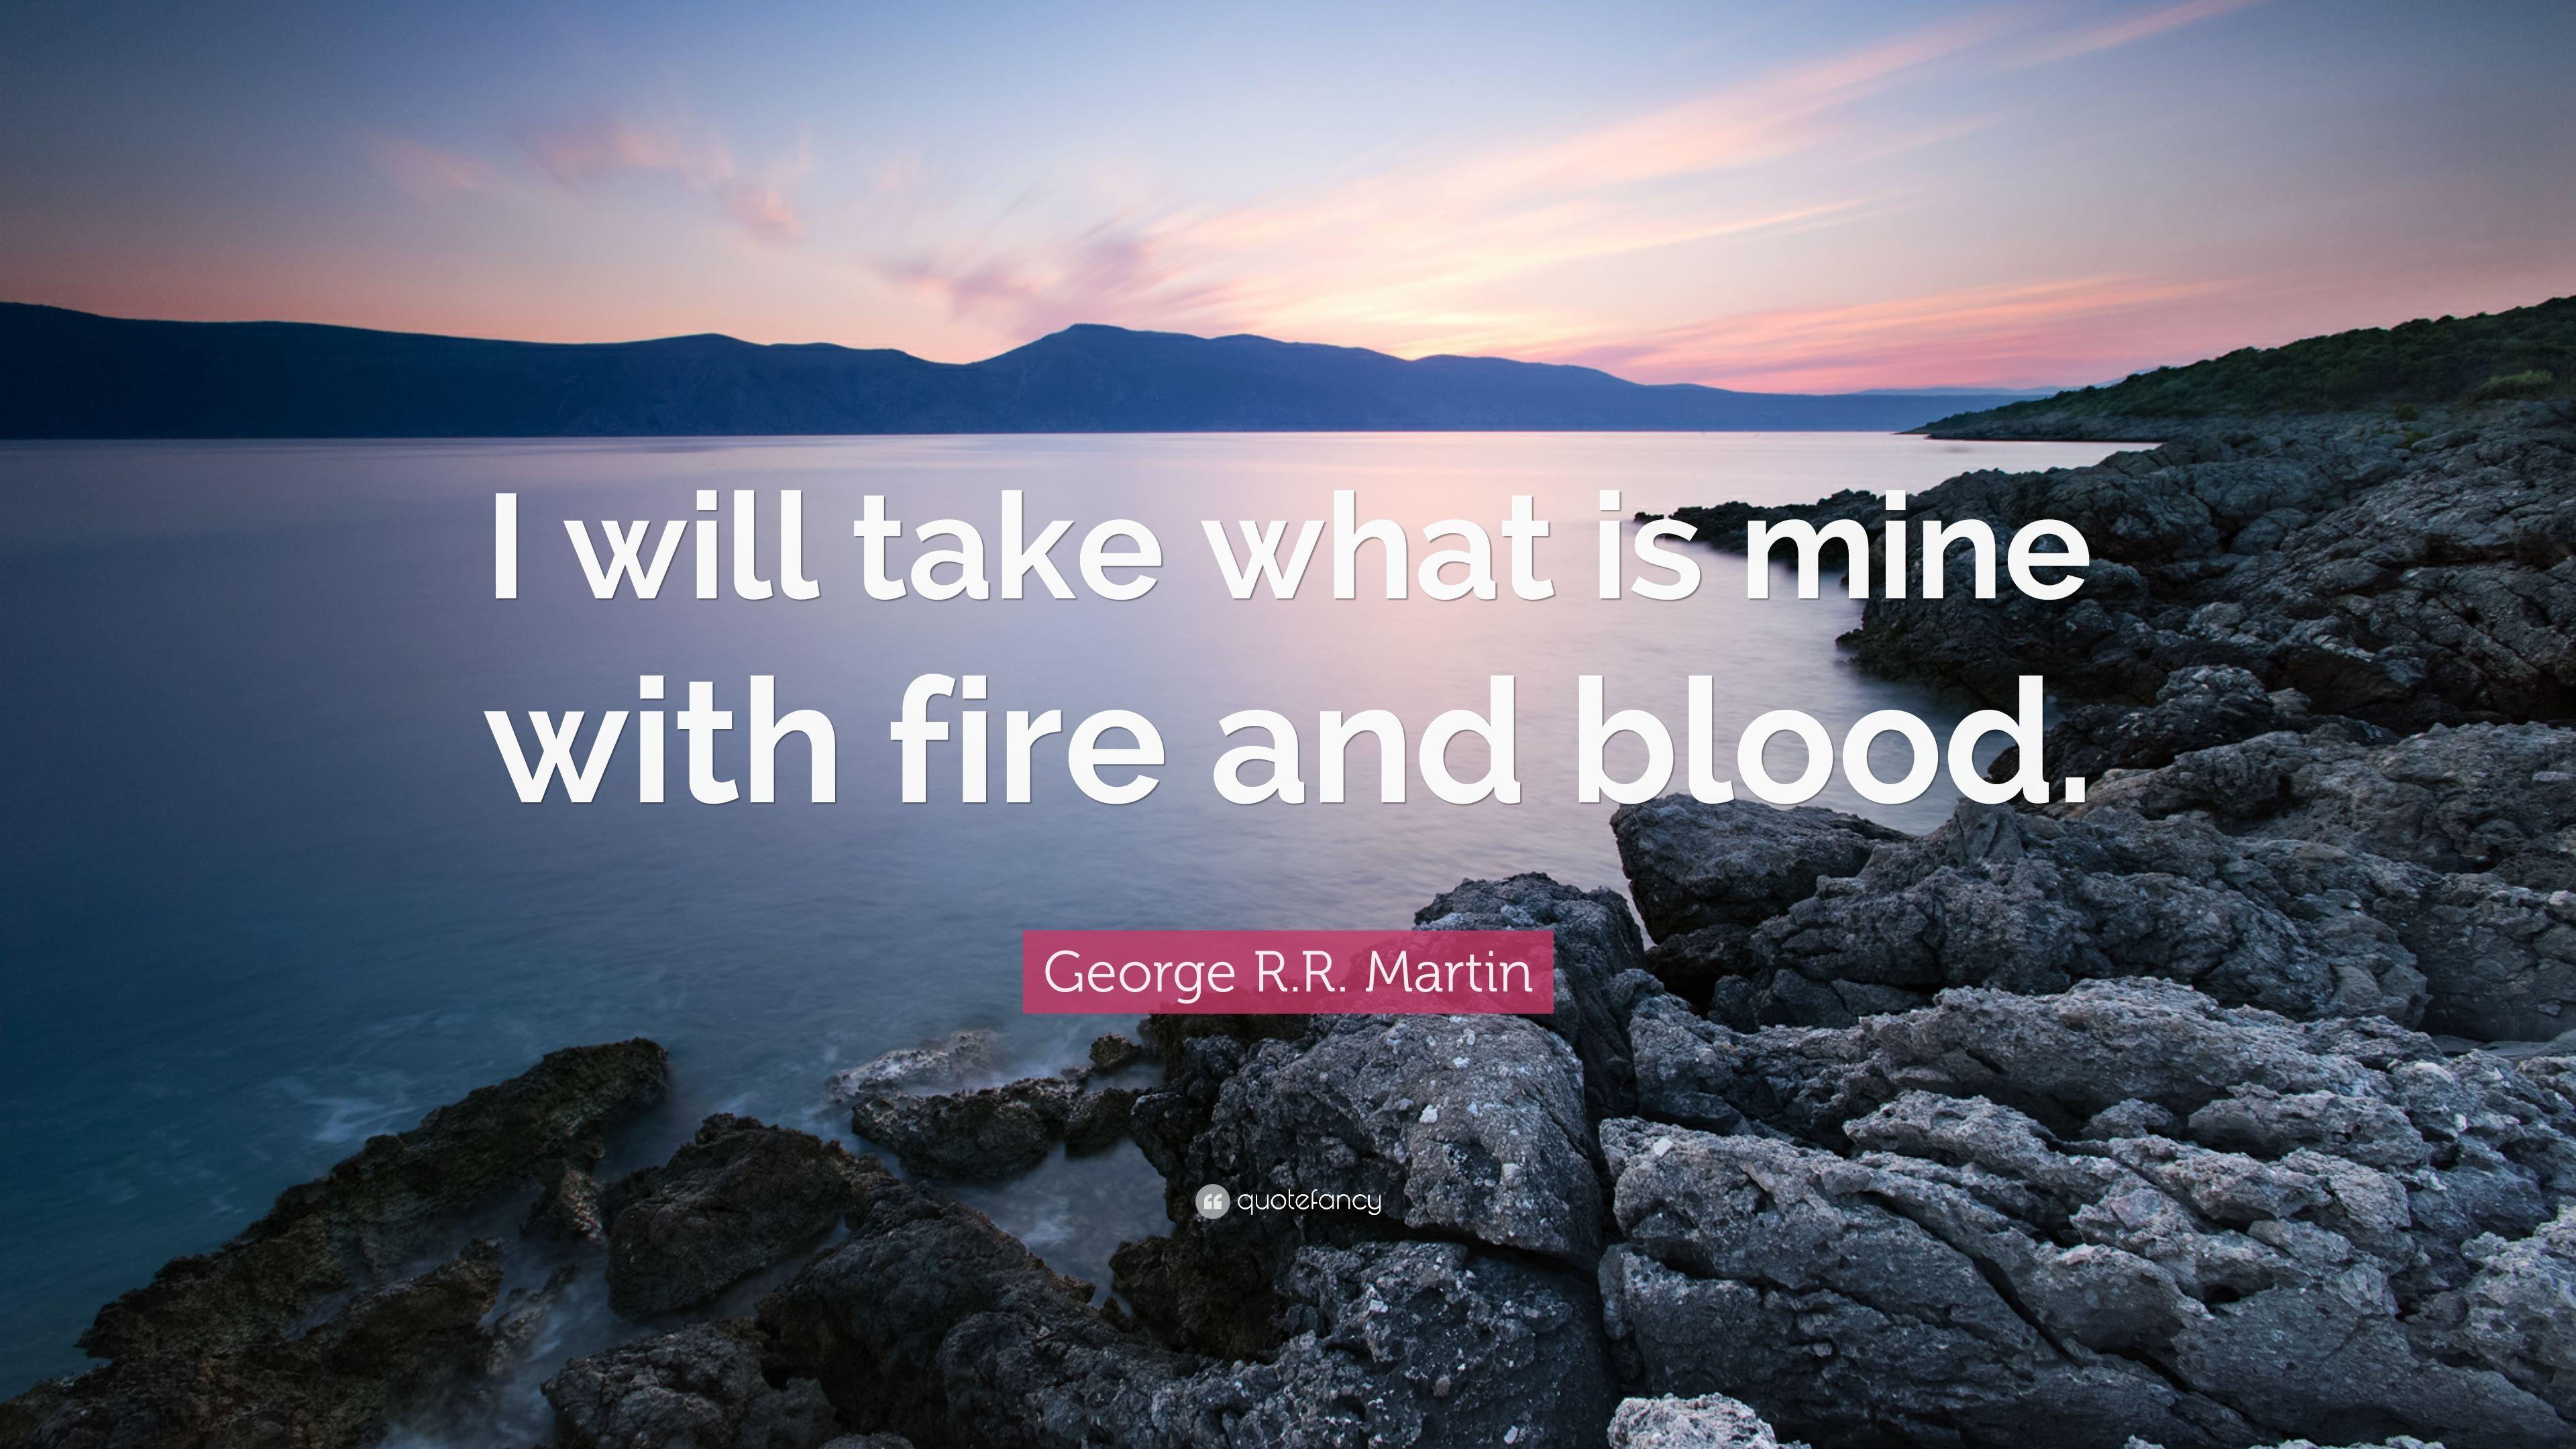 George R.R. Martin Quote: “I will take what is mine with fire